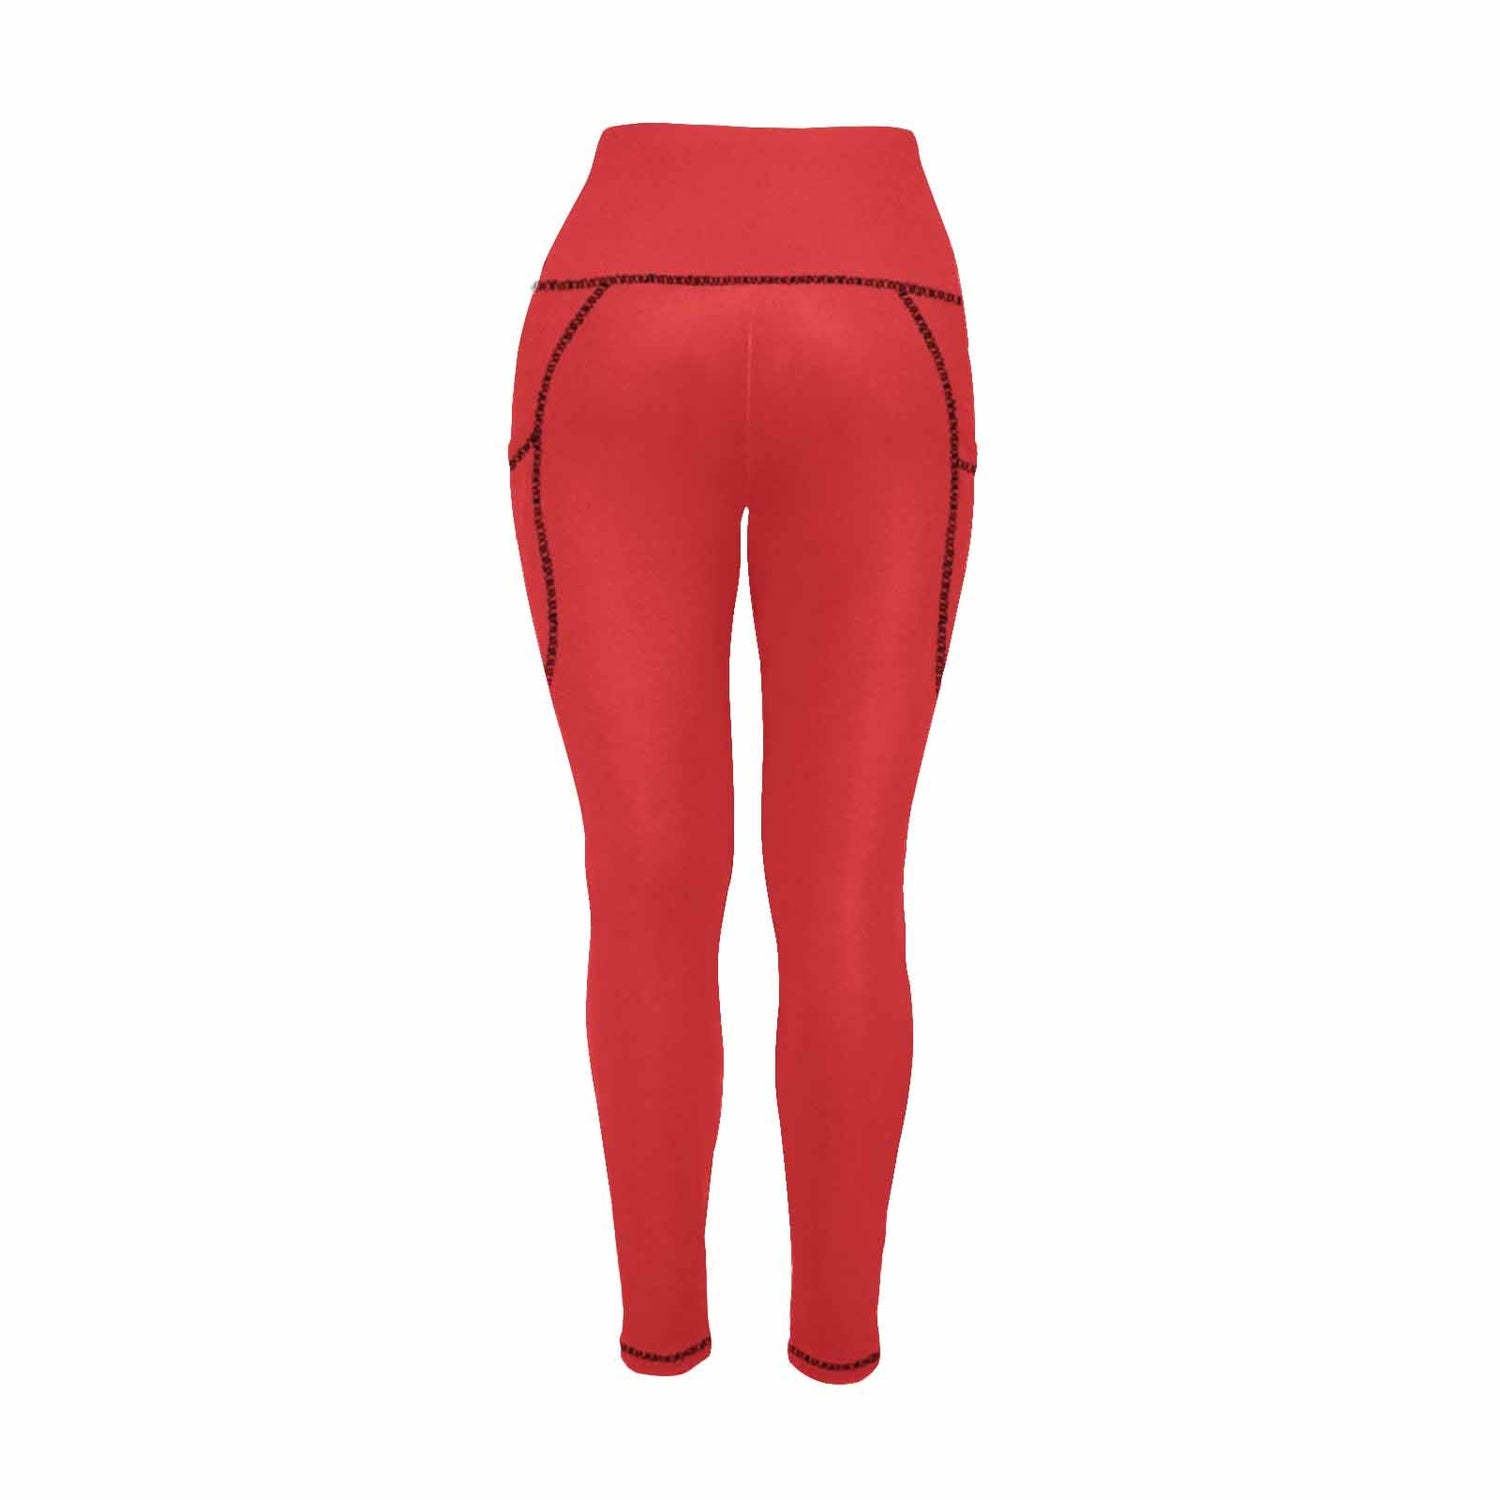 Womens Leggings With Pockets - Fitness Pants /  Chili Pepper Red